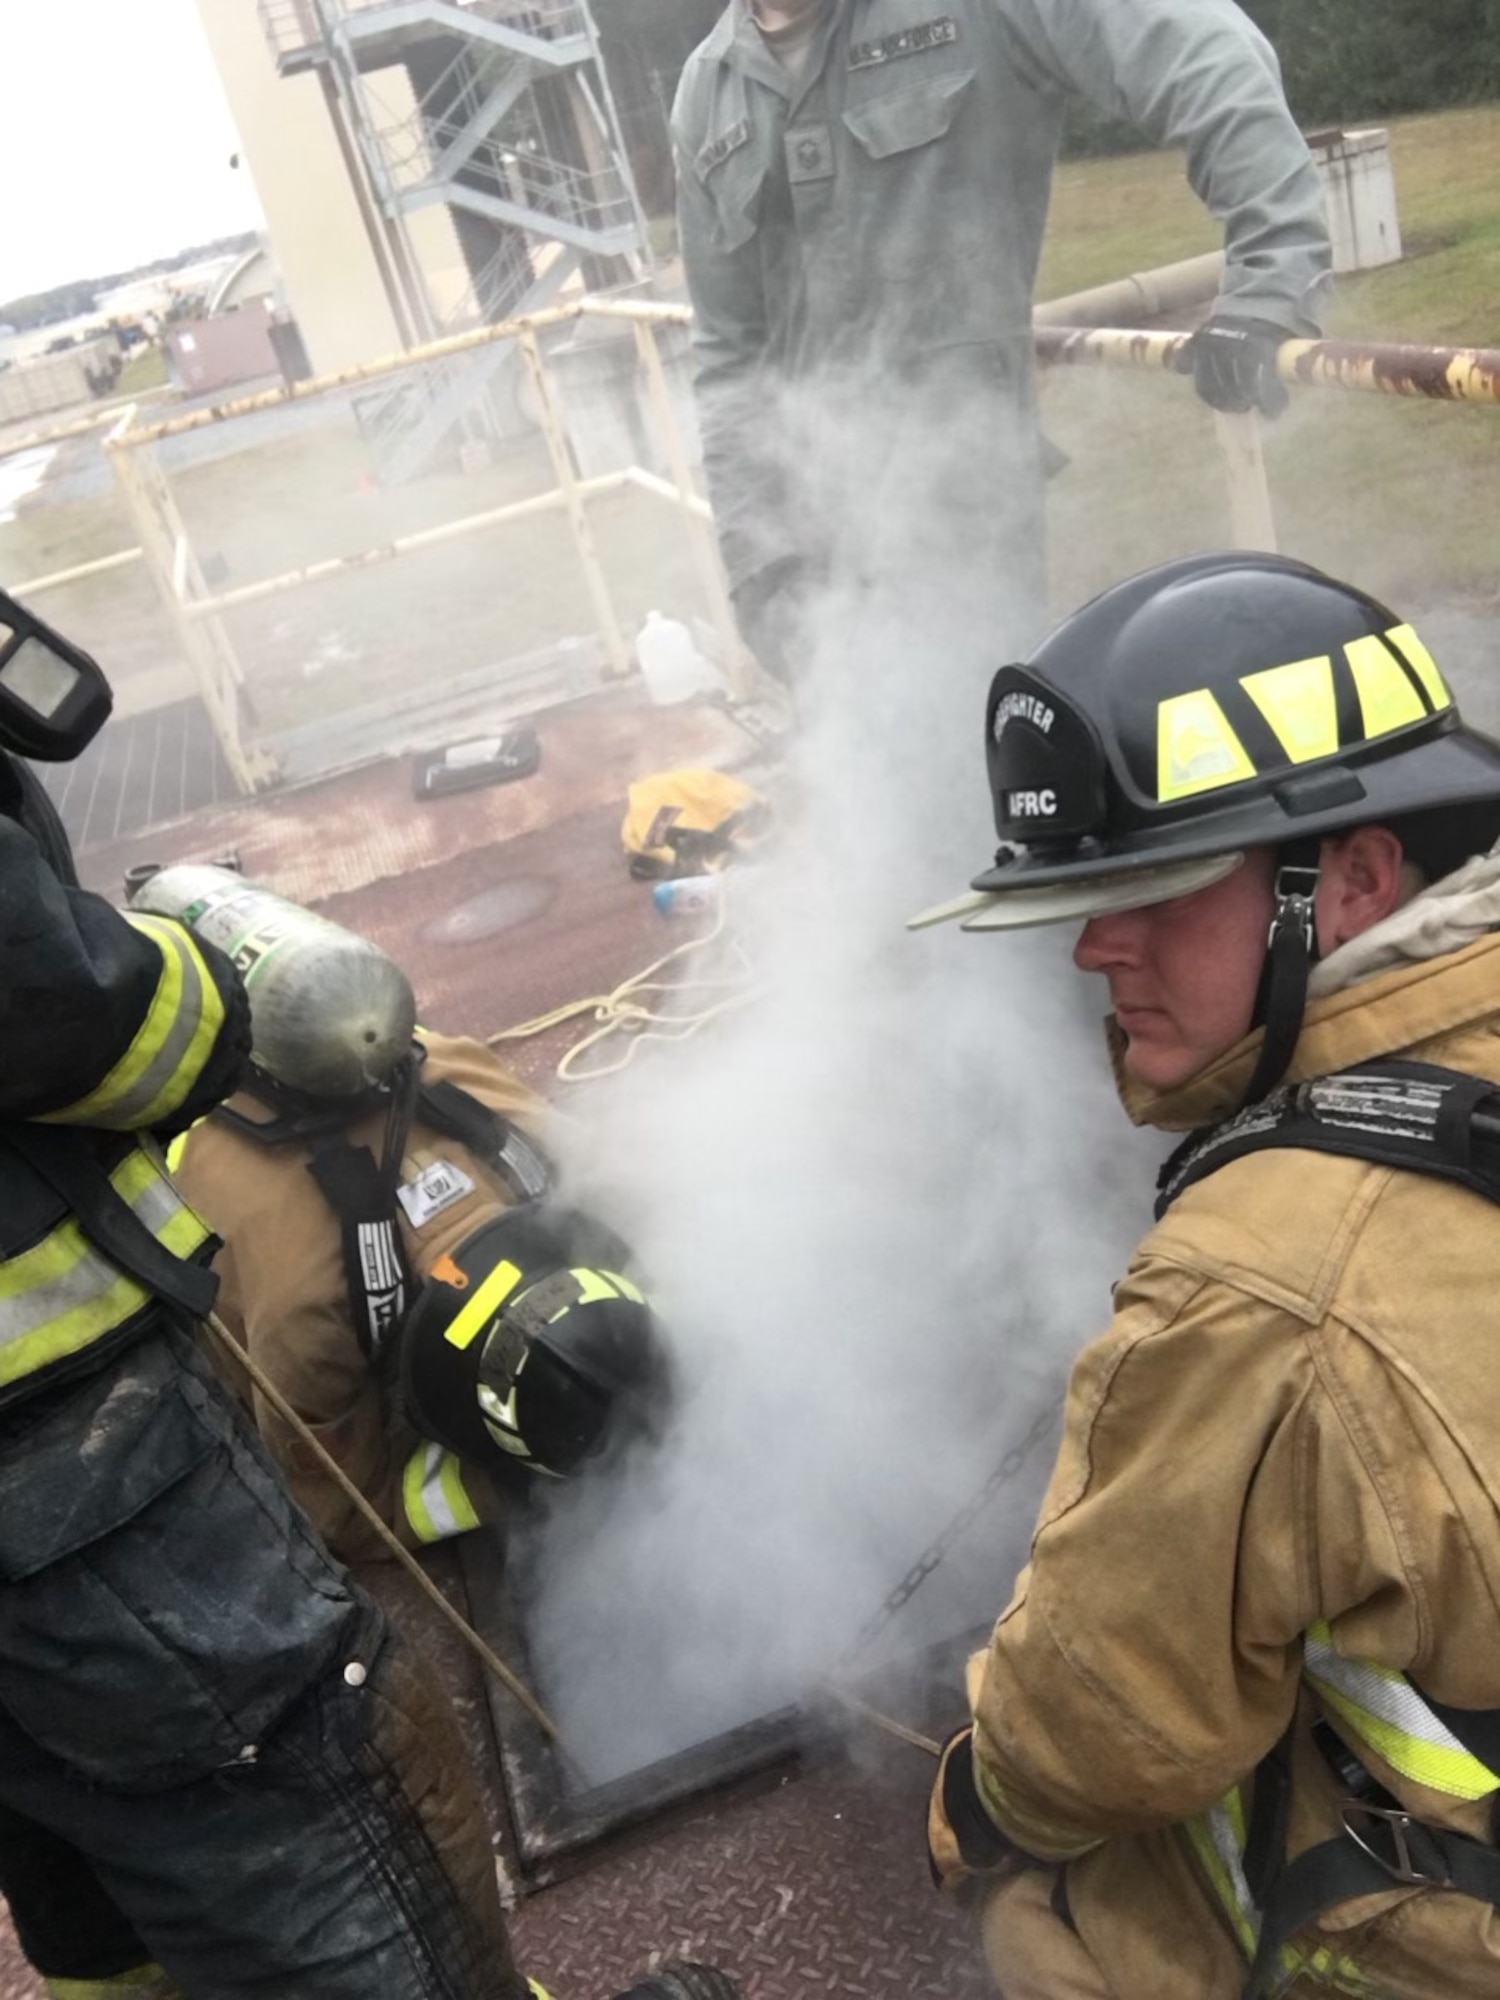 Master Sgt. Aaron Brindamour 914th Civil Engineer Squadron, training manager,  instructs sub-floor rescue during Firefighter Rescue and Survival Course at Dobbins Air Reserve Base, Georgia on 8 November, 2018. The goal of the Firefighter Rescue and Survival Course to refine the life-saving skills necessary to fight fires safely and effectively